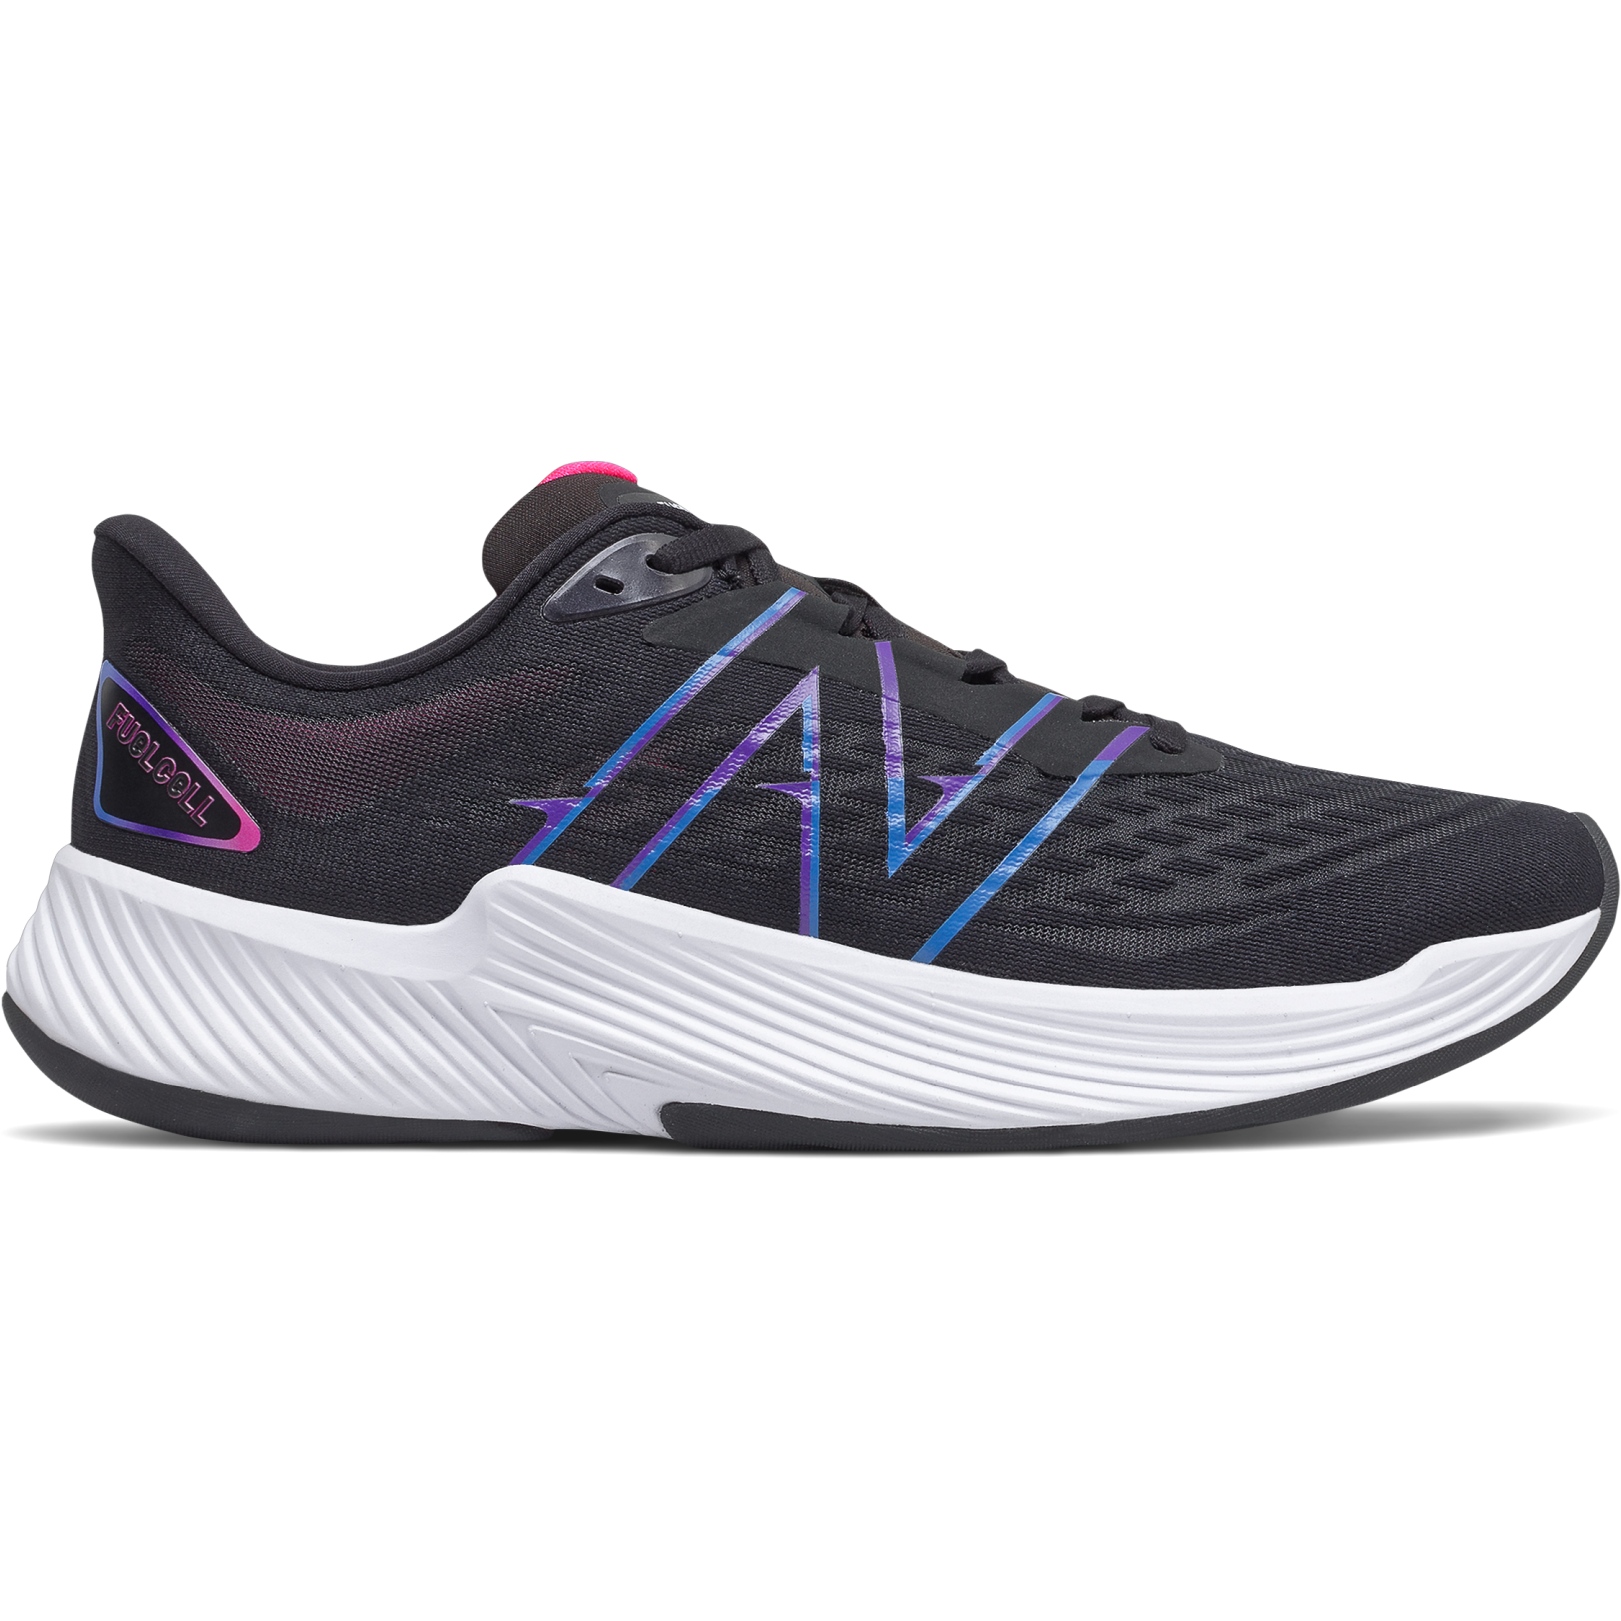 Image of New Balance FuelCell Prism v2 Running Shoes - Black